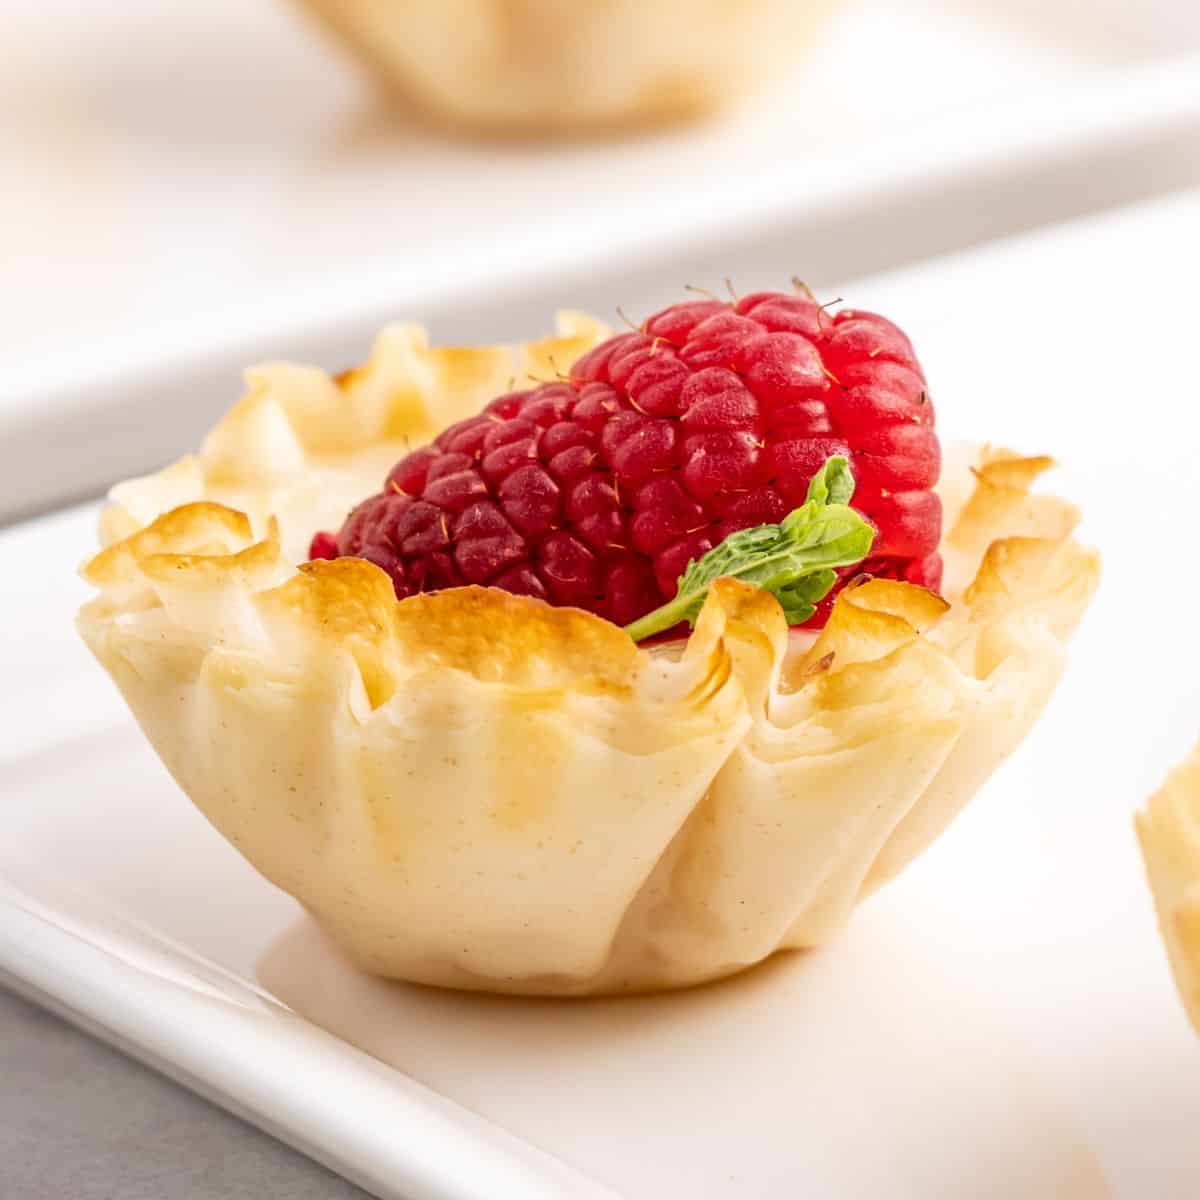 Sugar Free Mini Lemon Tarts, a simple  dessert recipe featuring a creamy lemon filling in a flaky crisp phyllo cup. Made with no added sugar.